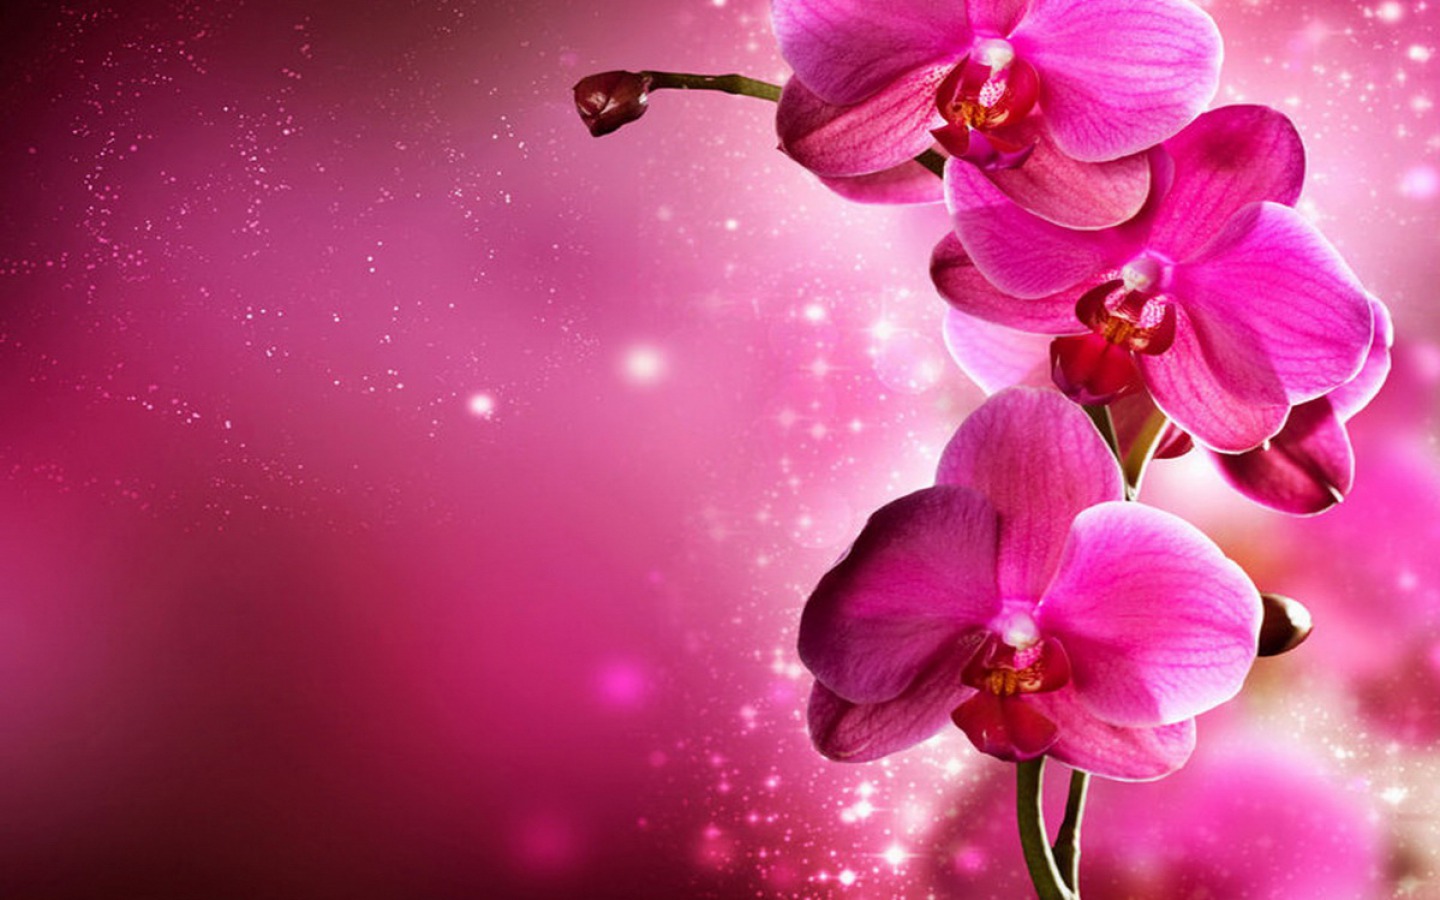 Pink Orchid Flowers Wallpaper